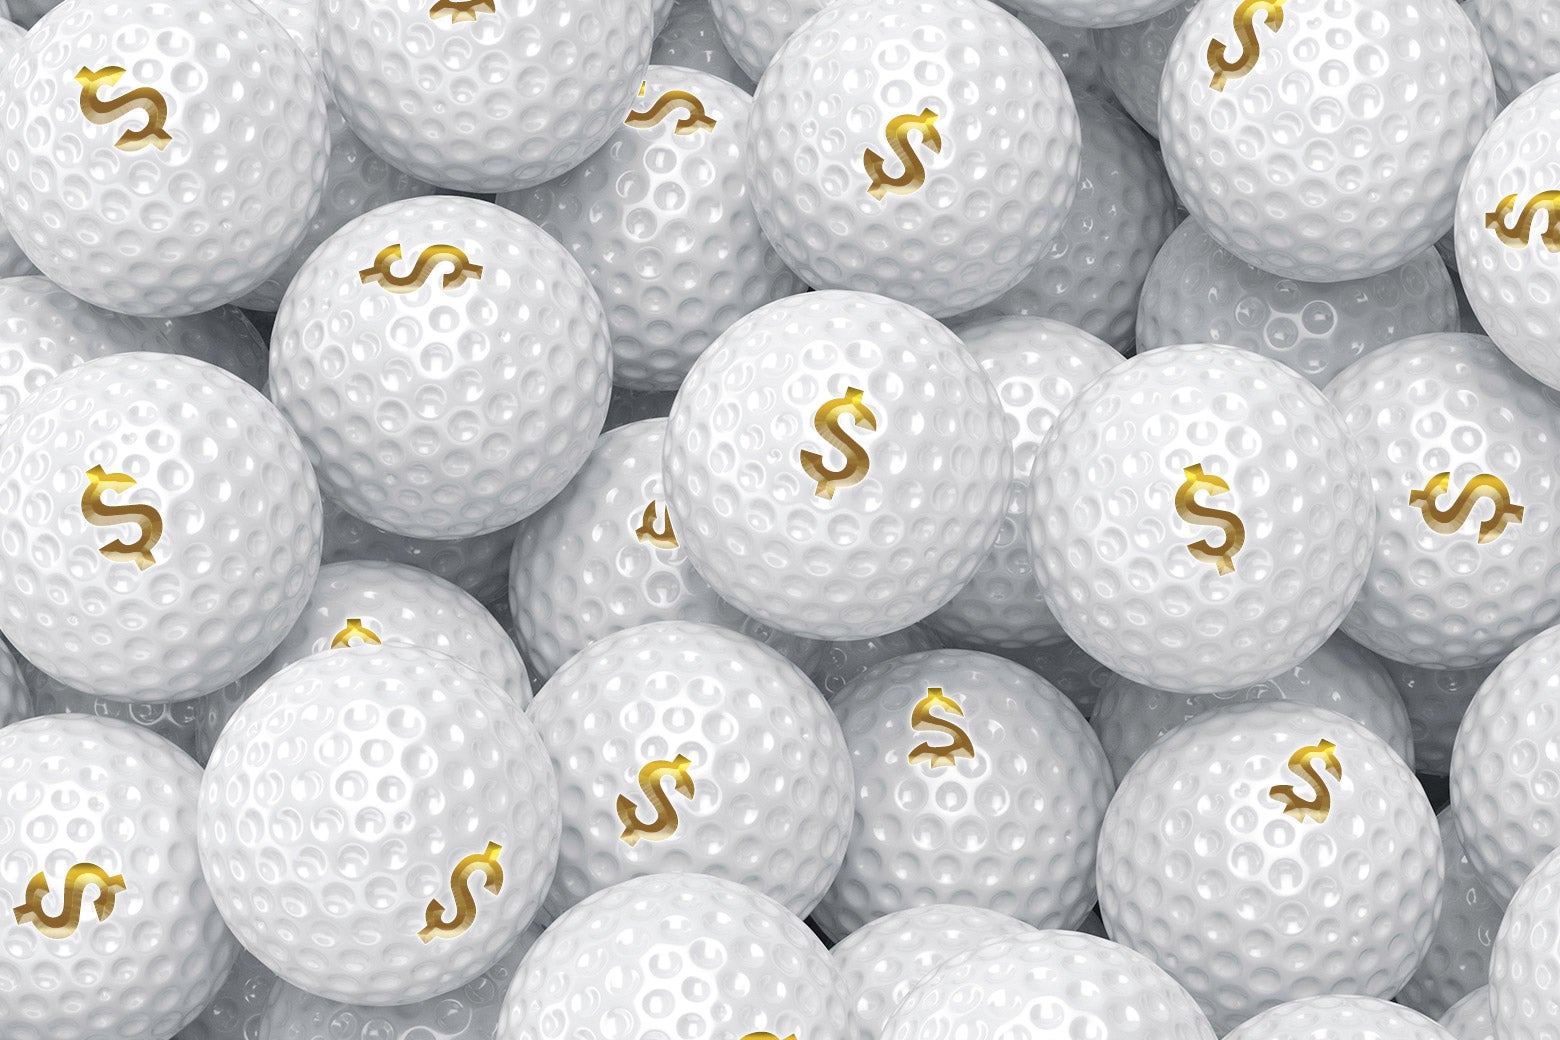 Why the Internet Is Screaming About Golf Balls Alex Kirshner